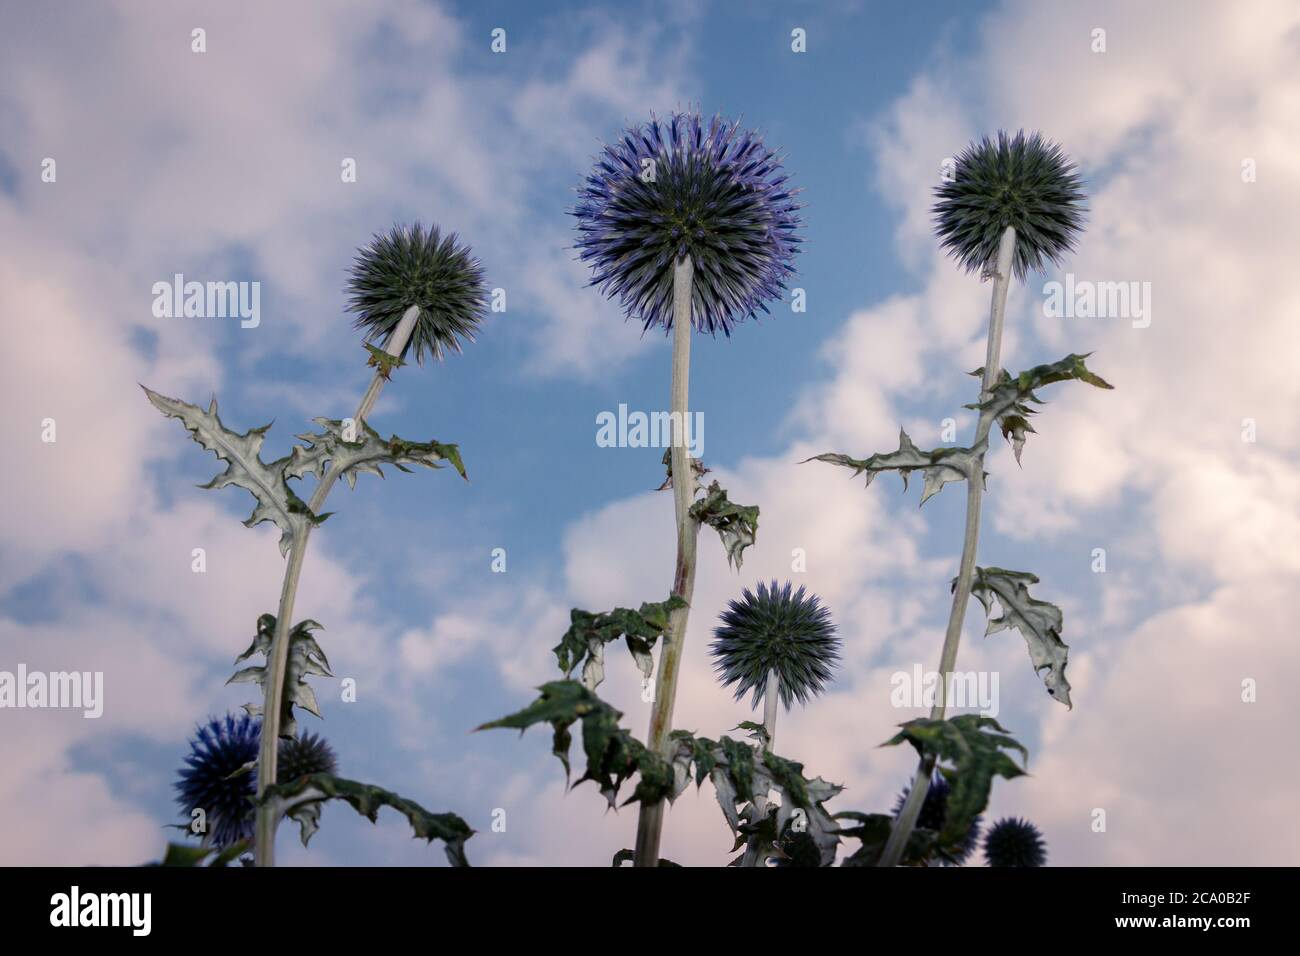 The blue globe thistle fully blooming in the summertime,  the Netherlands, photo taken in frog perspective Stock Photo